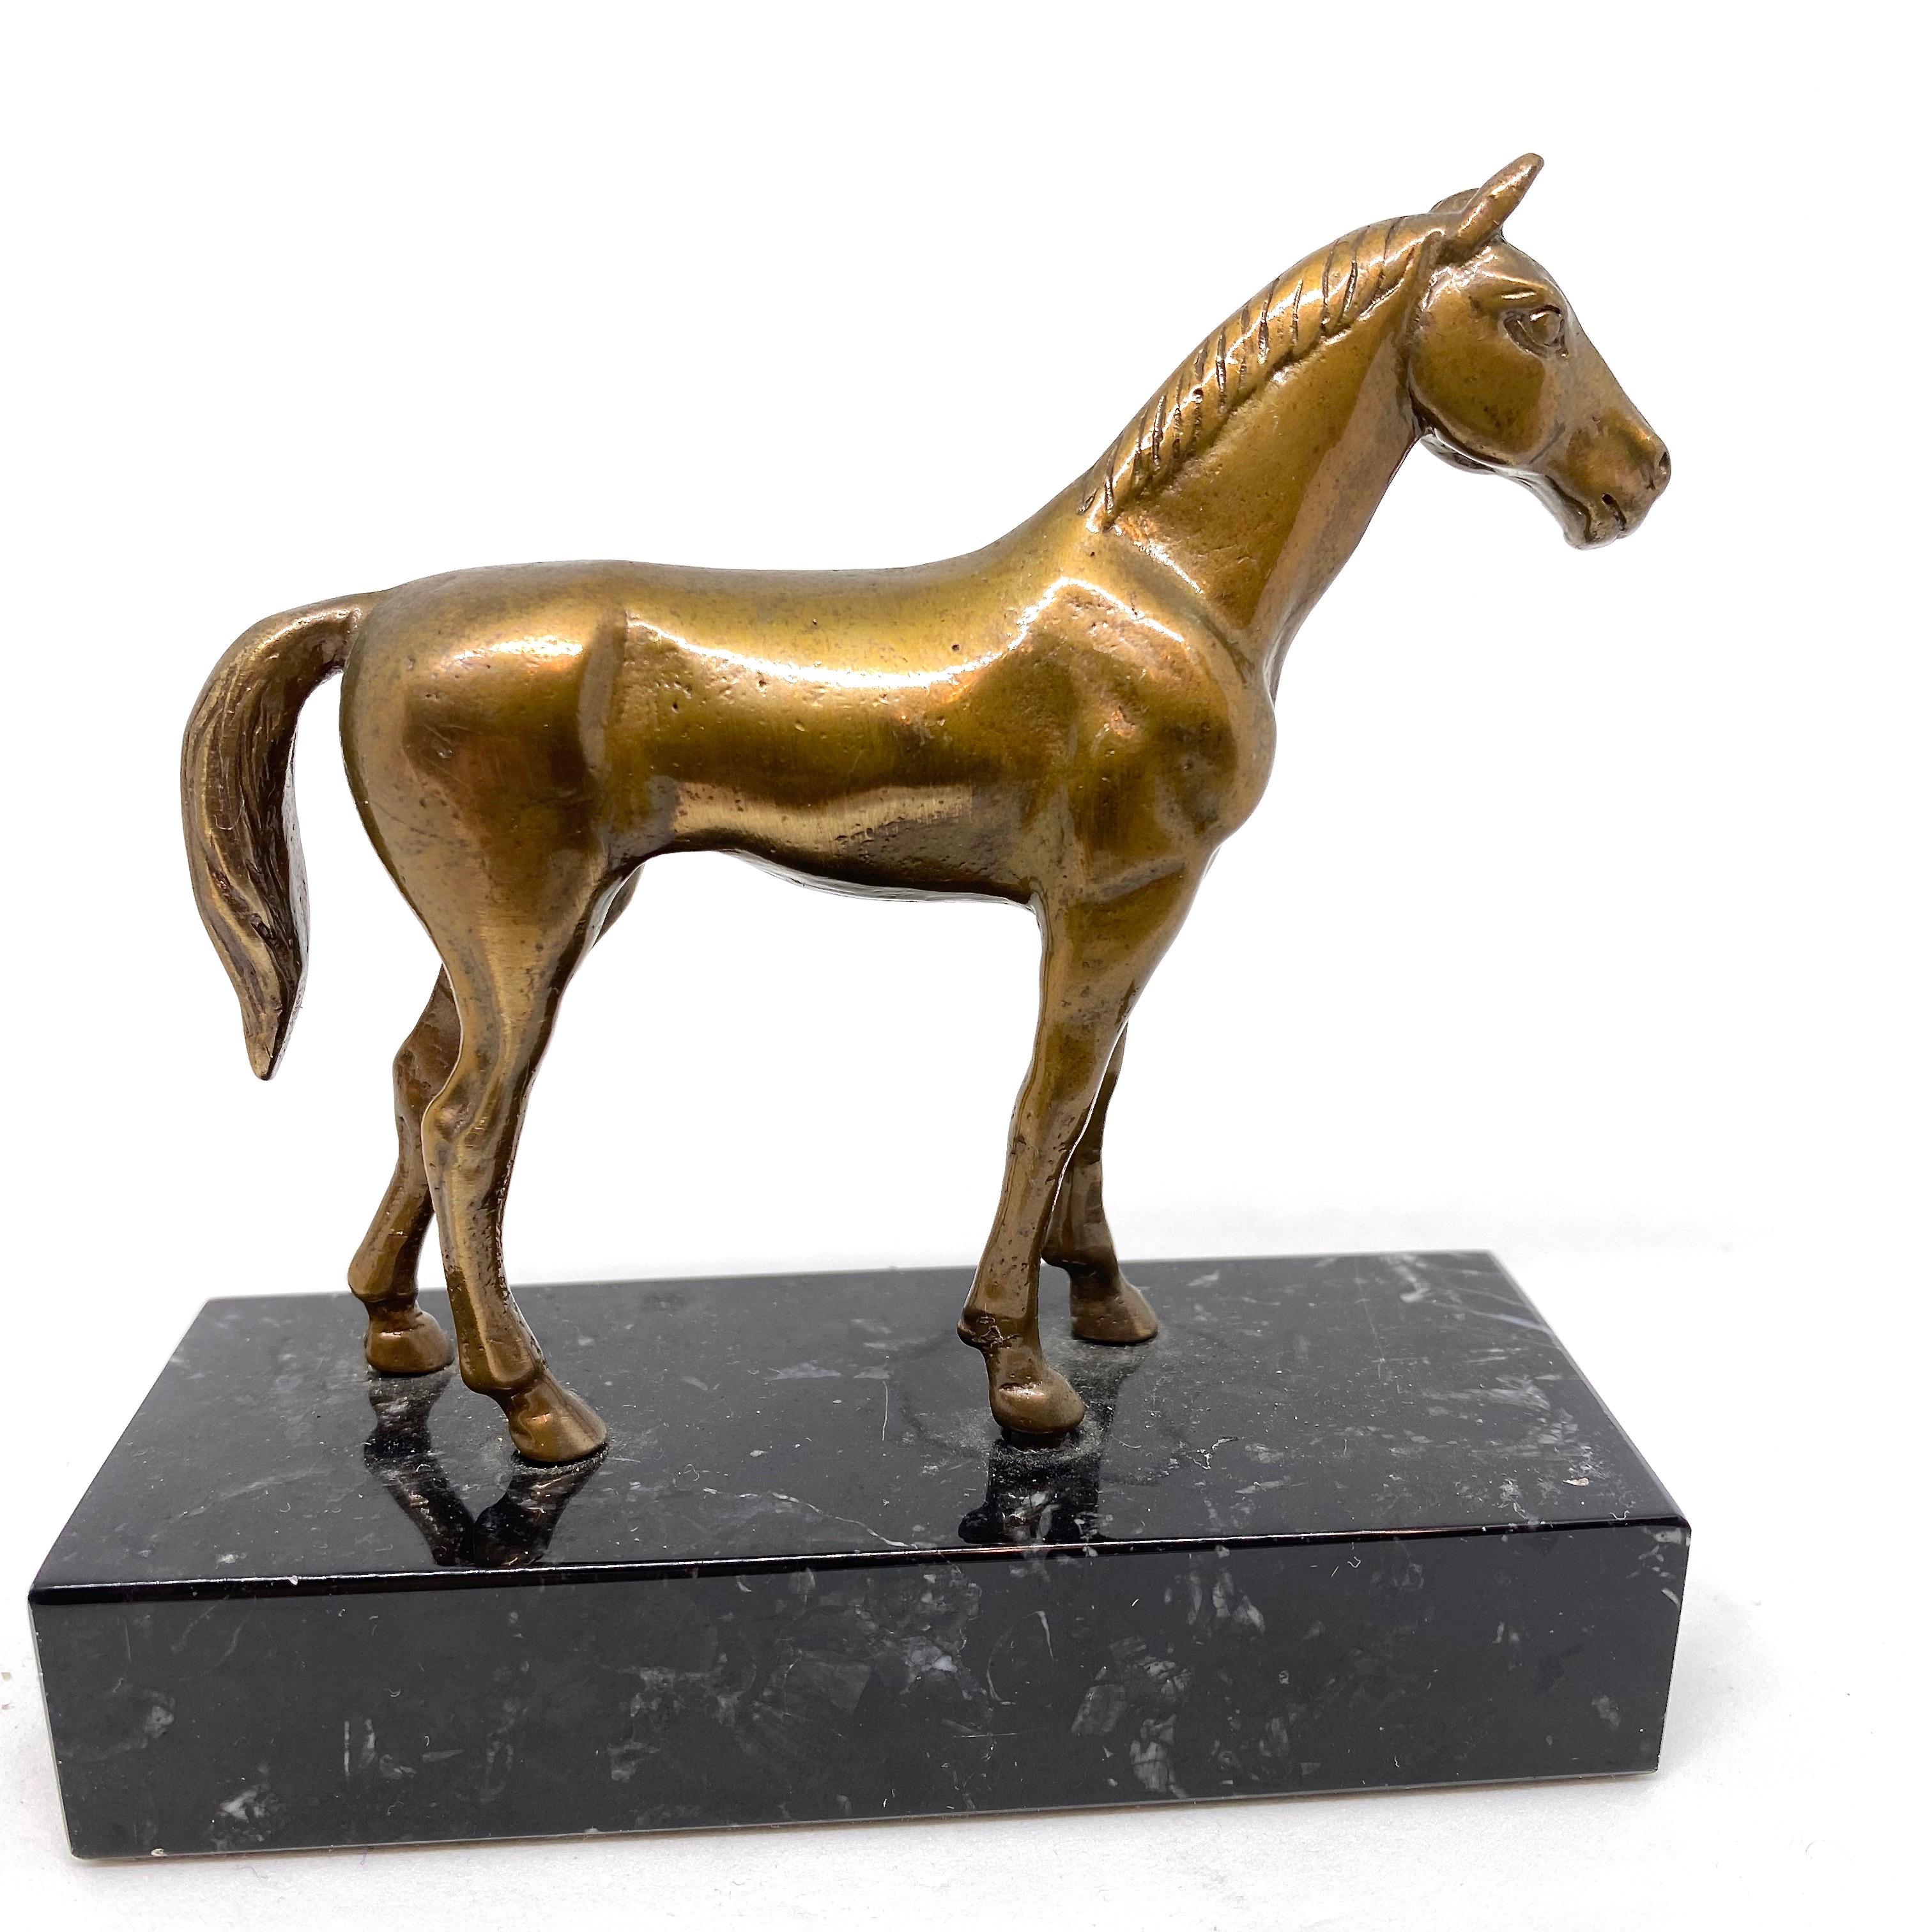 A decorative Horse sculpture. Some wear with a nice patina, but this is old-age. Made of metal and a marble base. This makes a nice addition to any room or just on your desktop, probably as a paperweight.